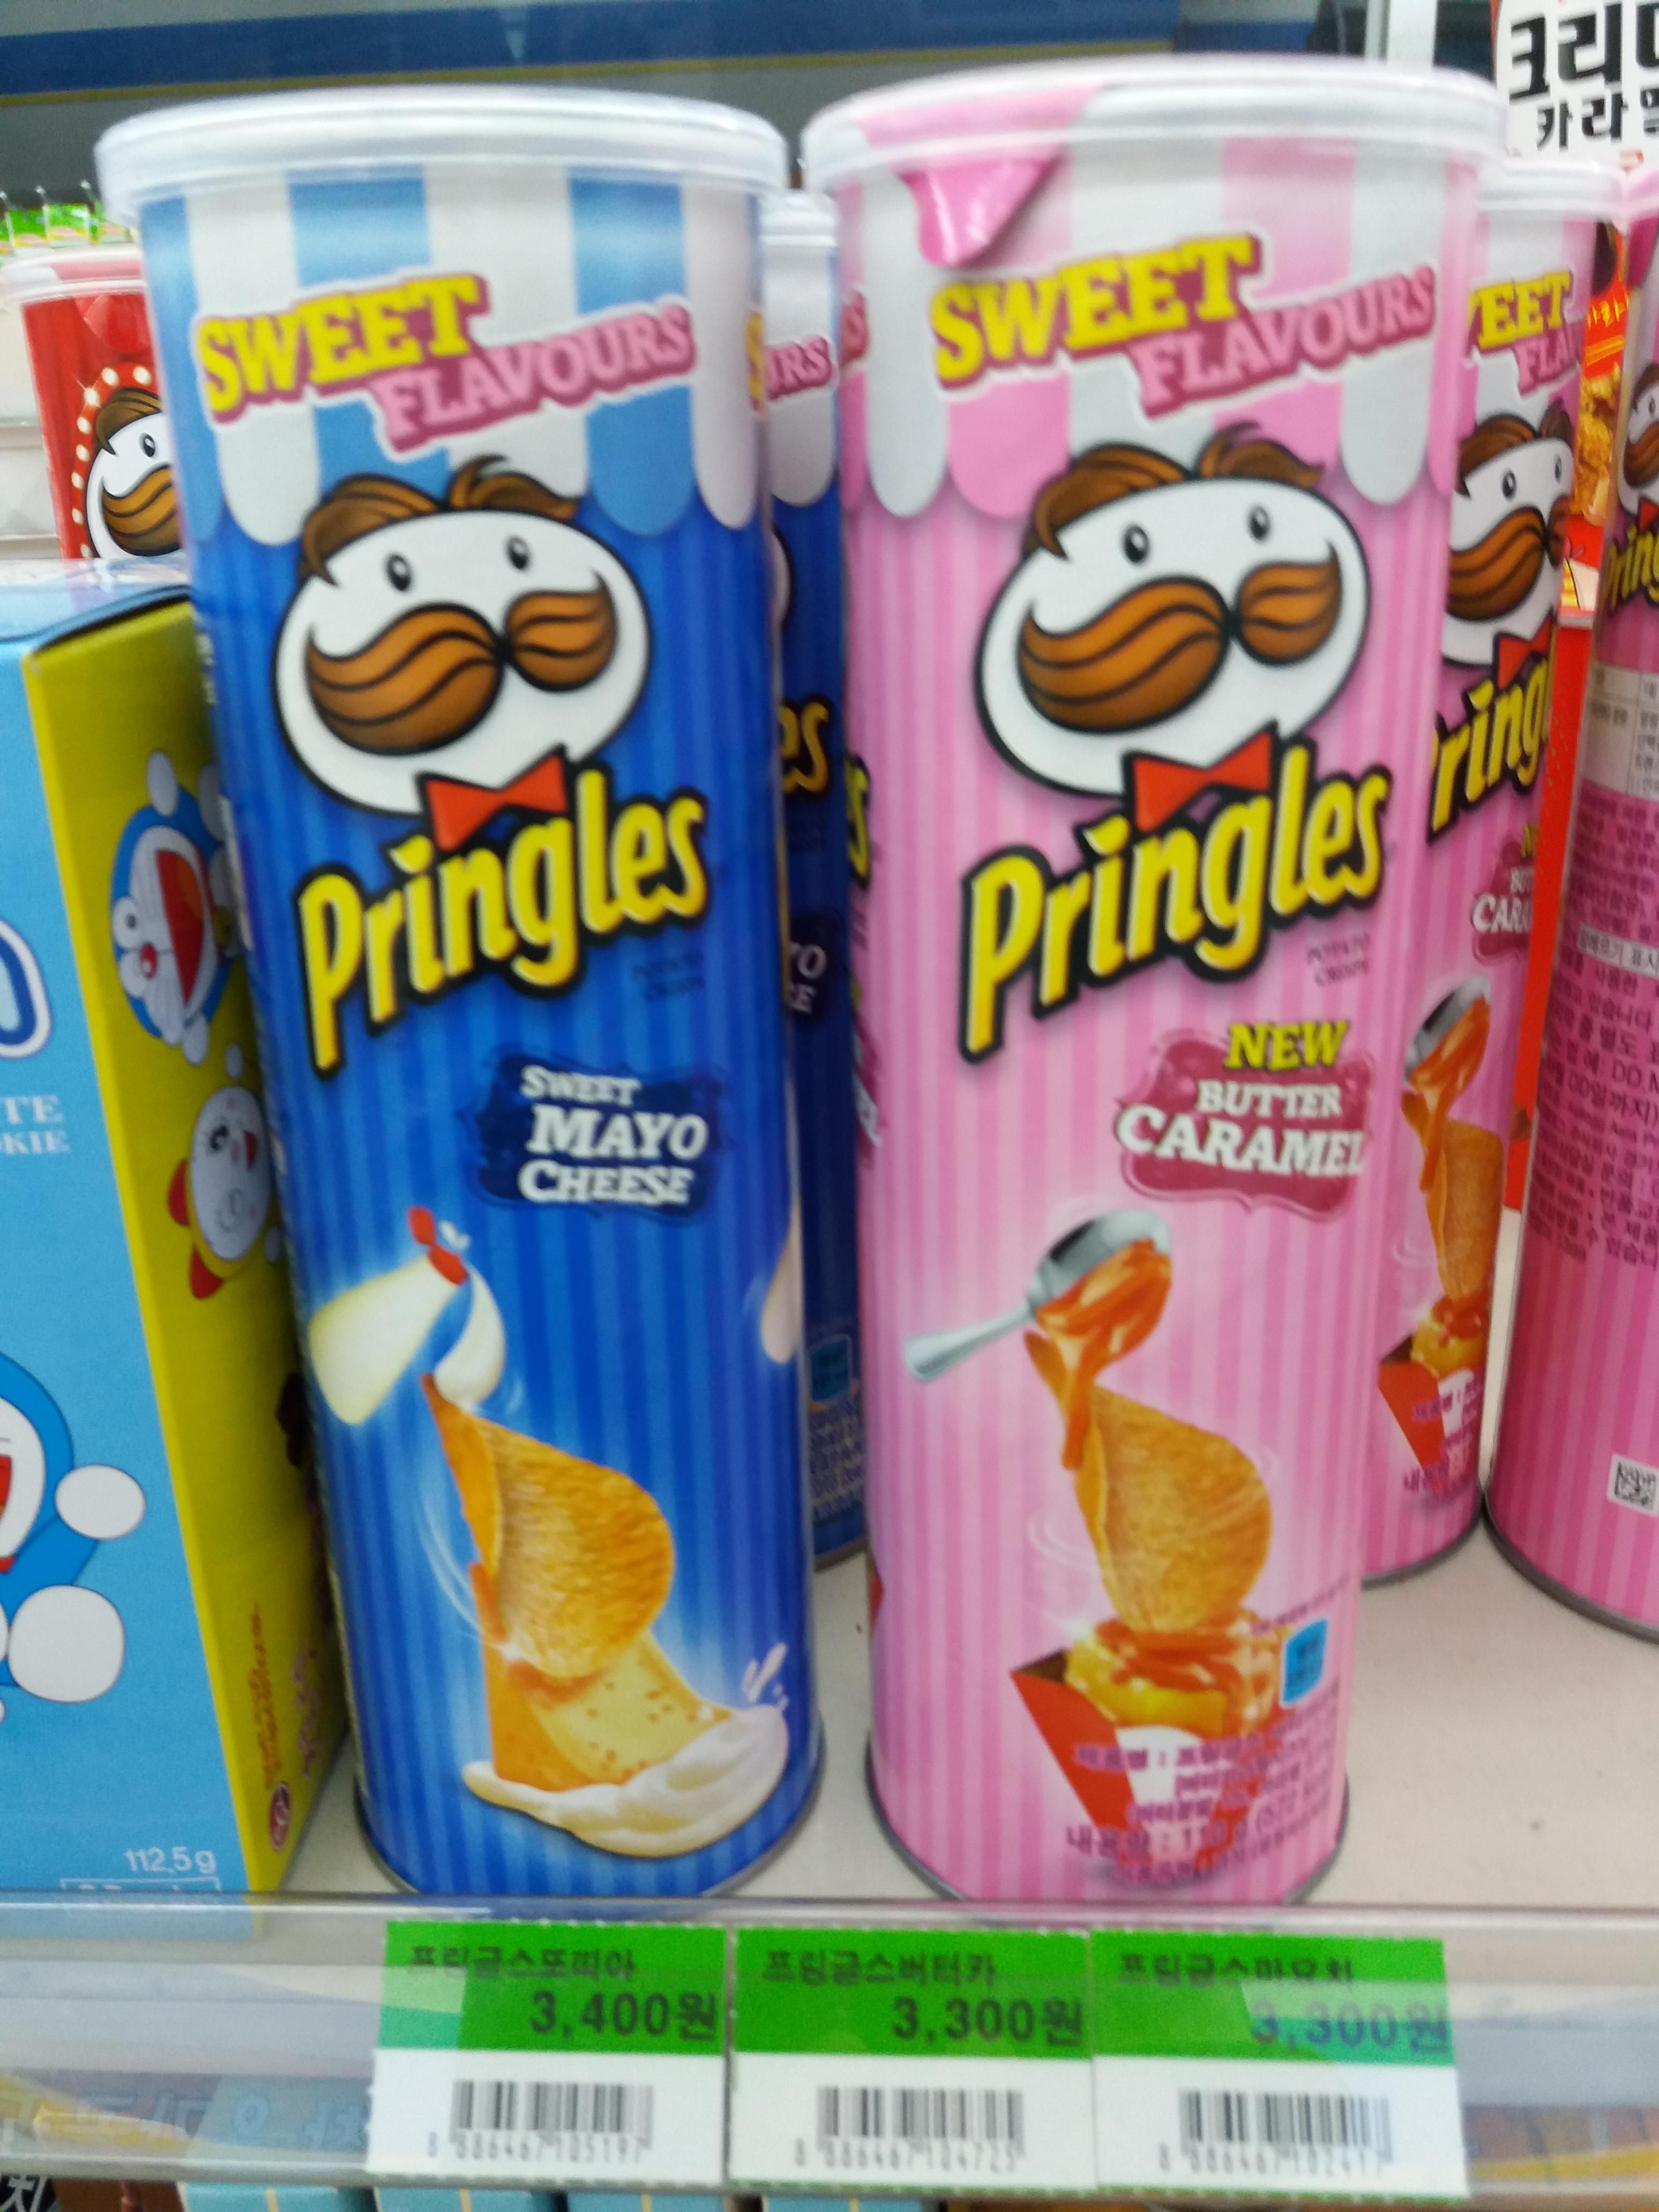 What's the grossest food-flavored Pringle you can think of?